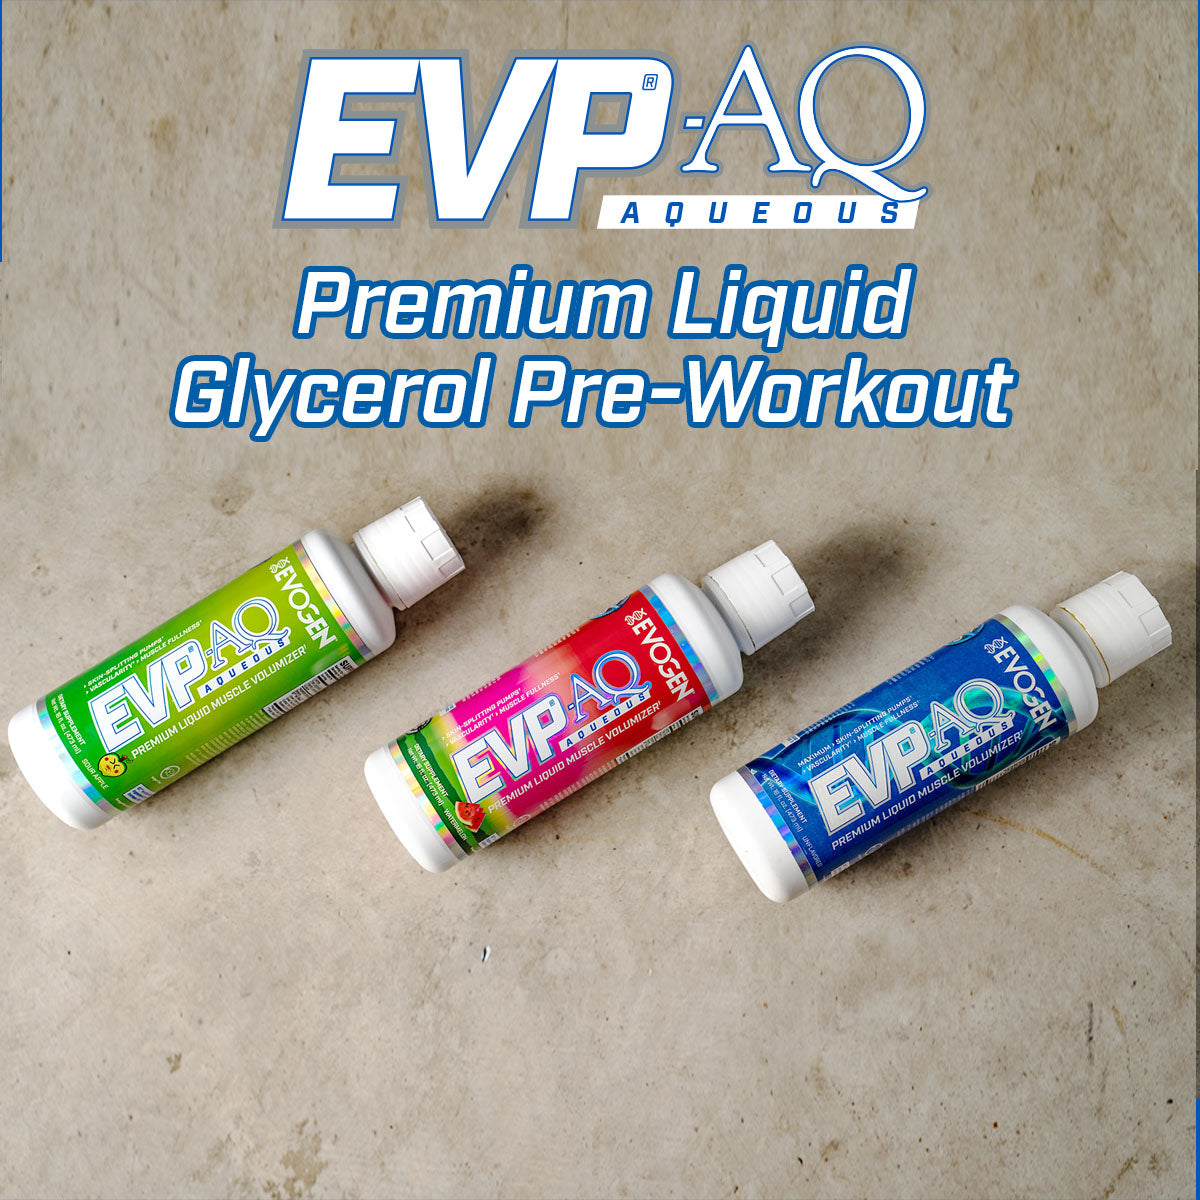 EVP-AQ premium liquid glycerol preworkout ad featuring now available in sour apple, watermelon, and unflavored